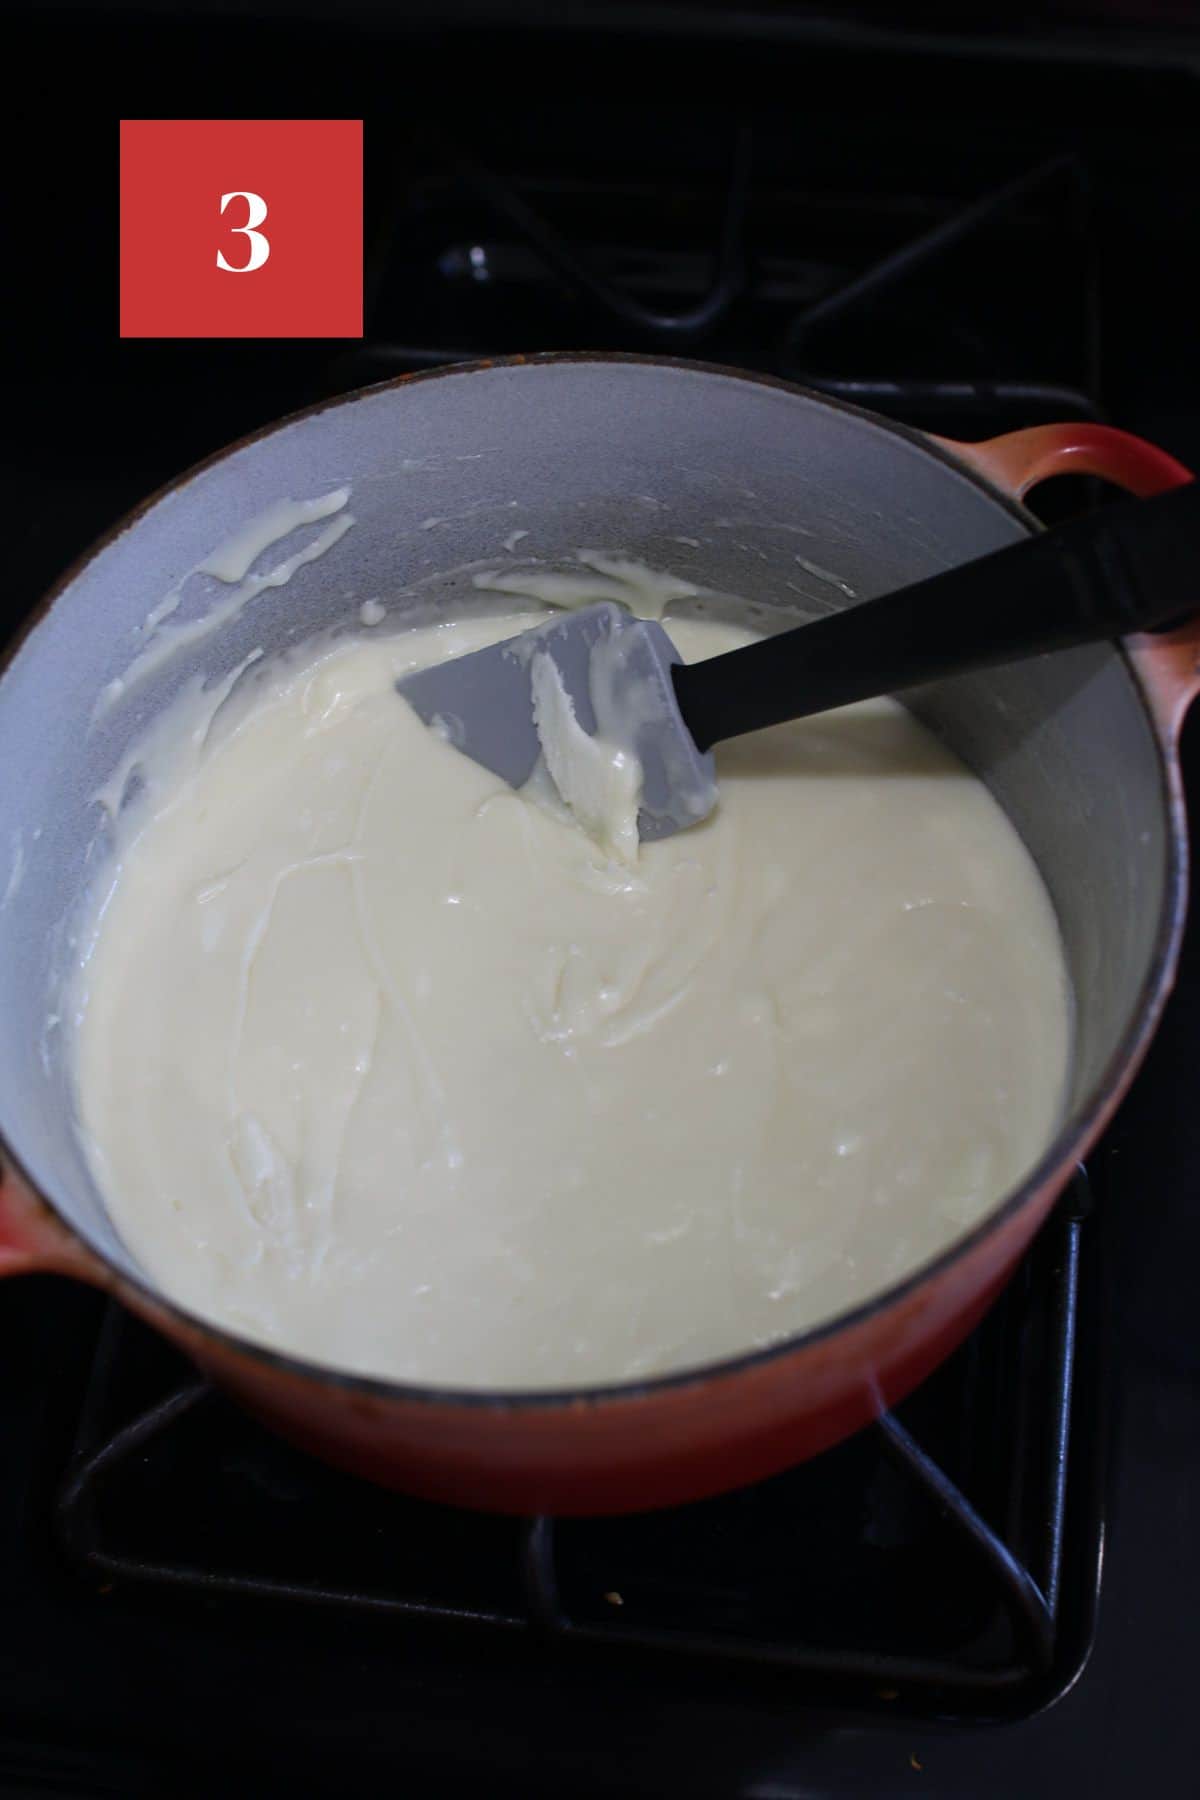 A small red dutch oven on top of the stove with white chocolate fudge mixtures and a silicone spatula. In the upper left corner is a dark red square with a white '3' in the center.